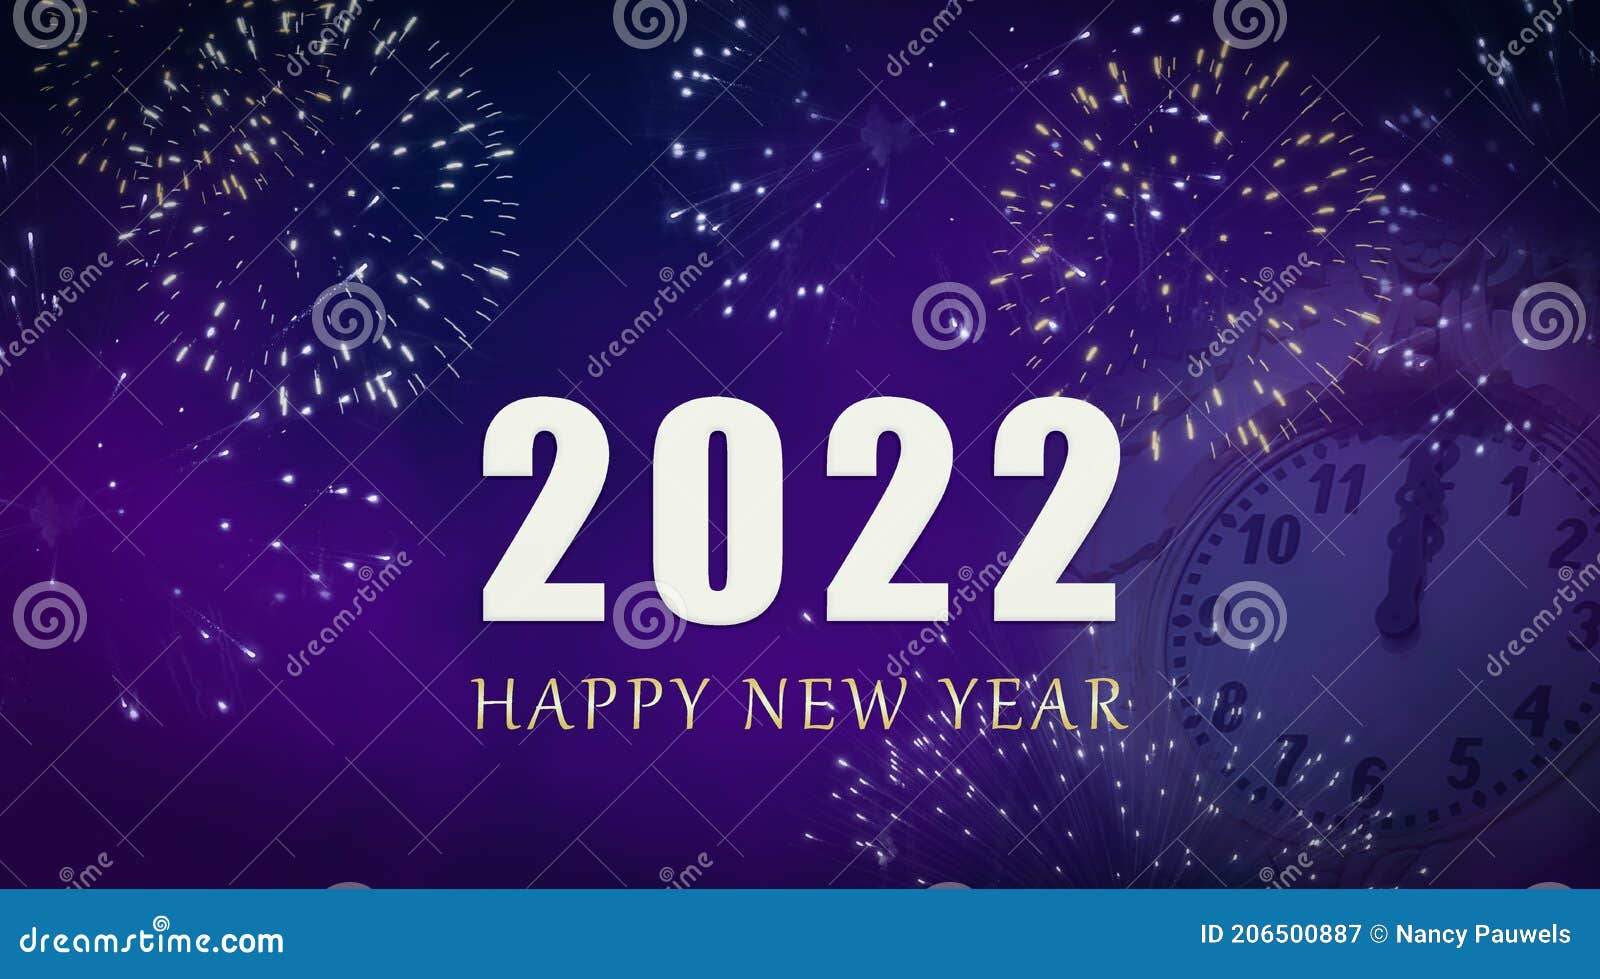 2022 Happy New Year Card With Clock And Fireworks. Stock Illustration